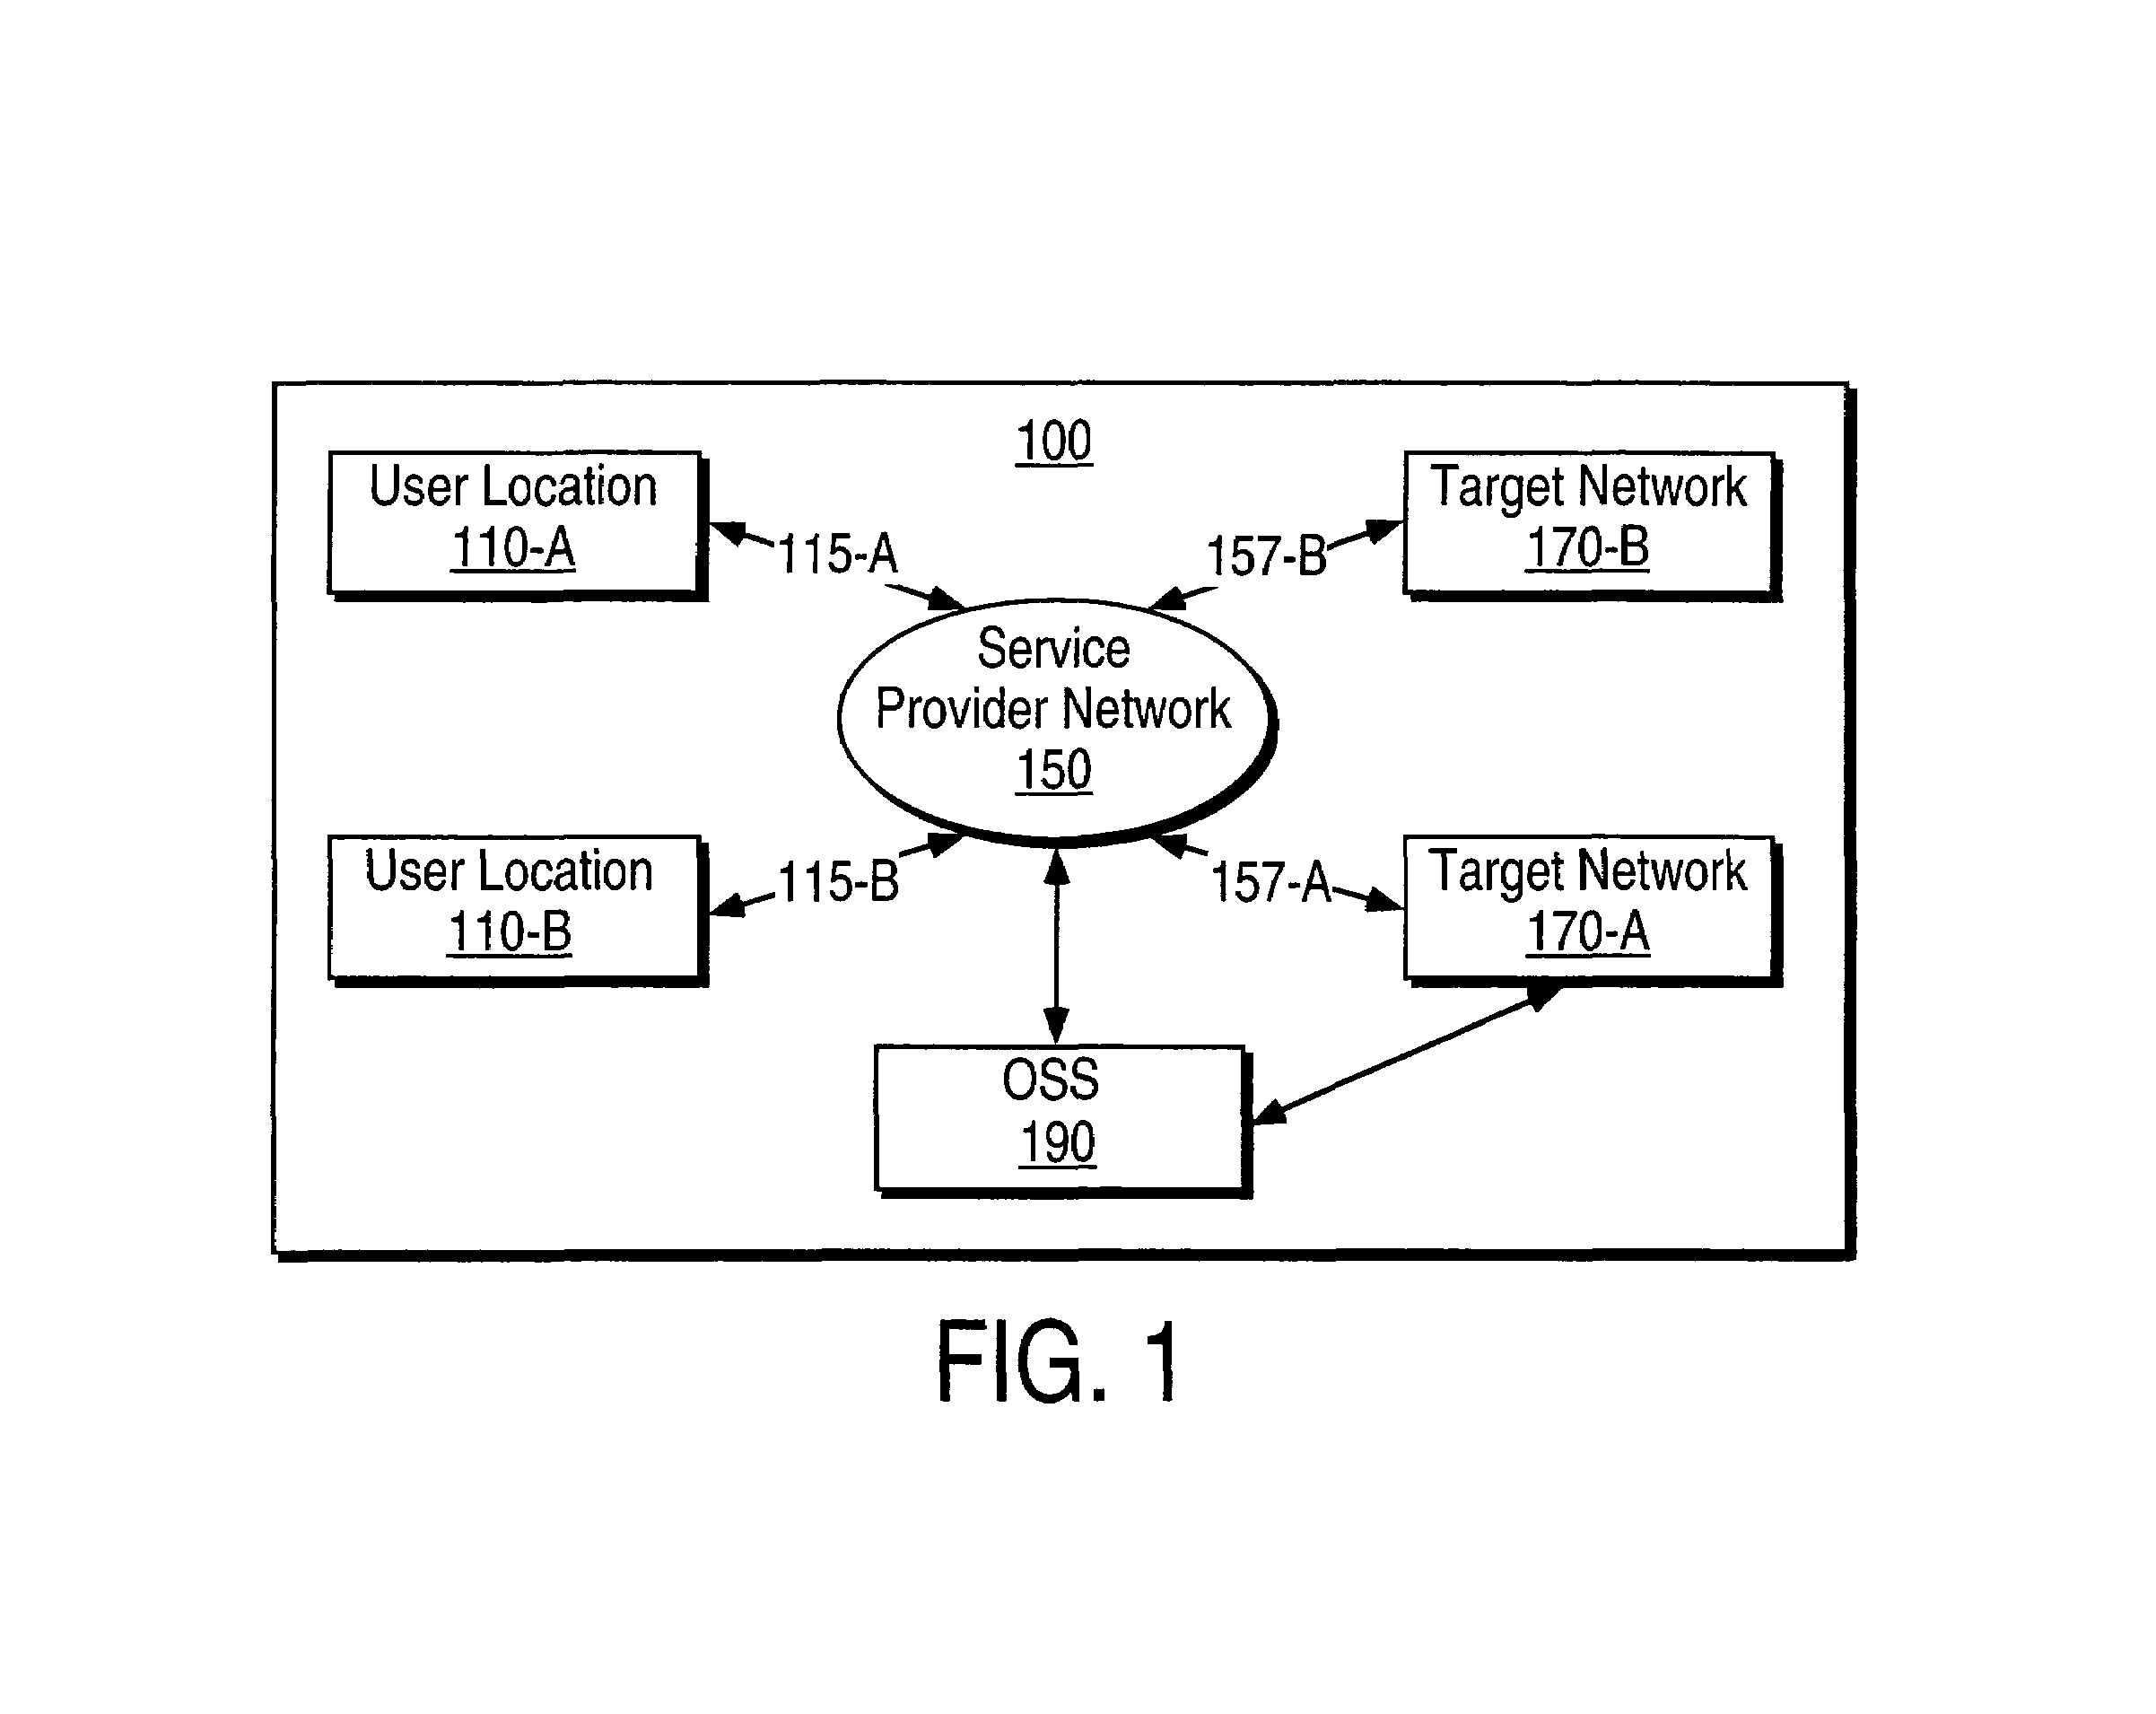 Automatic configuration and provisioning of virtual circuits for initial installation of high bandwidth connections